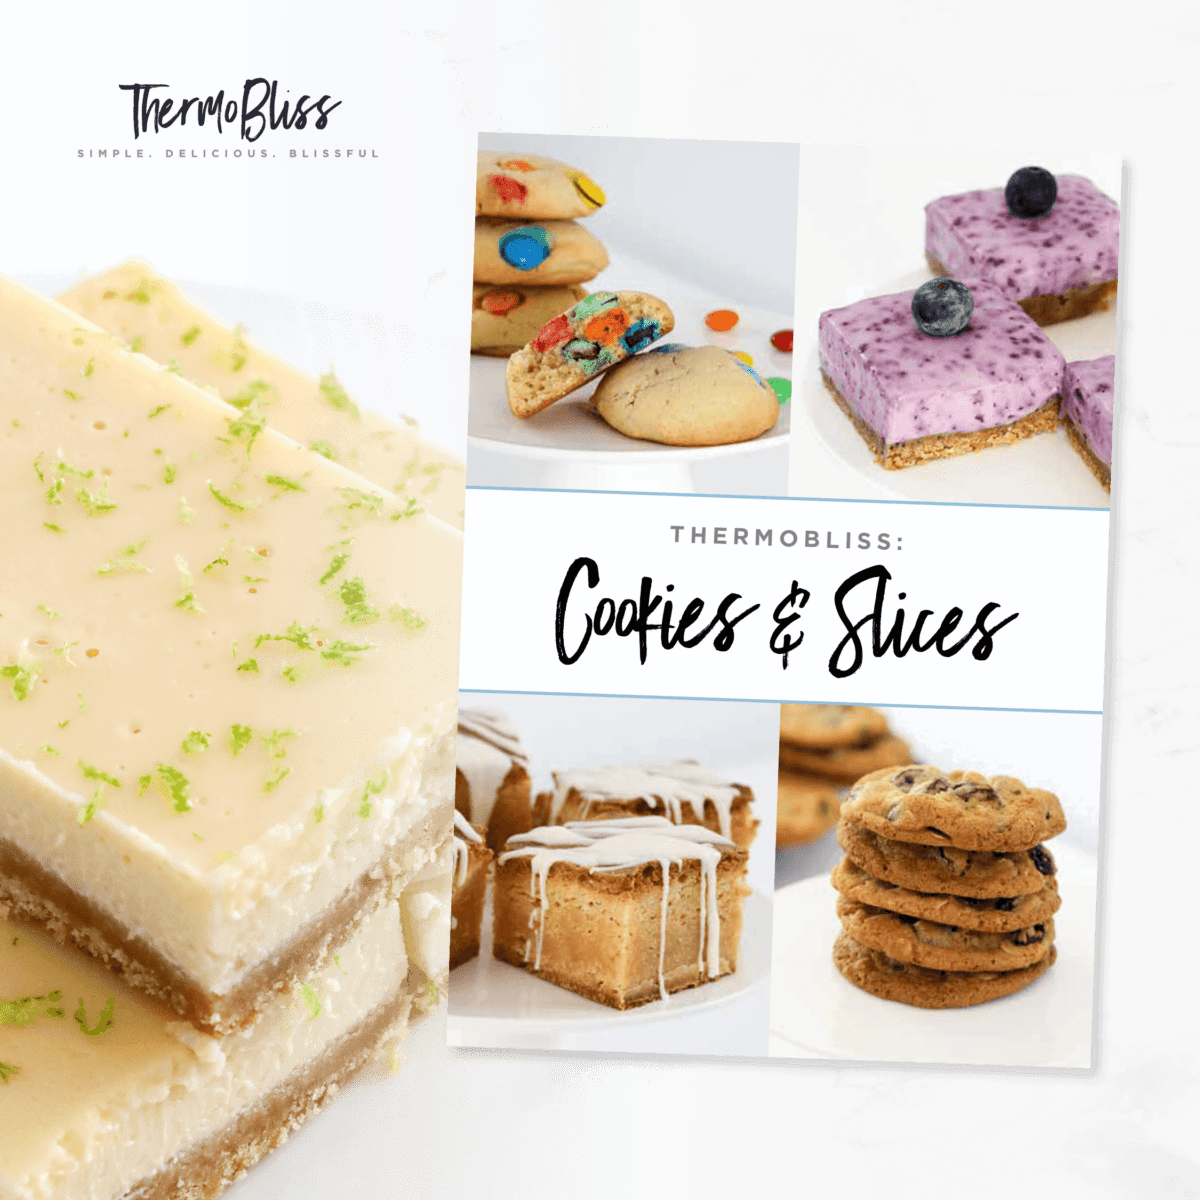 Image of the front cover of Thermomix Cookies & Slices Cookbook.